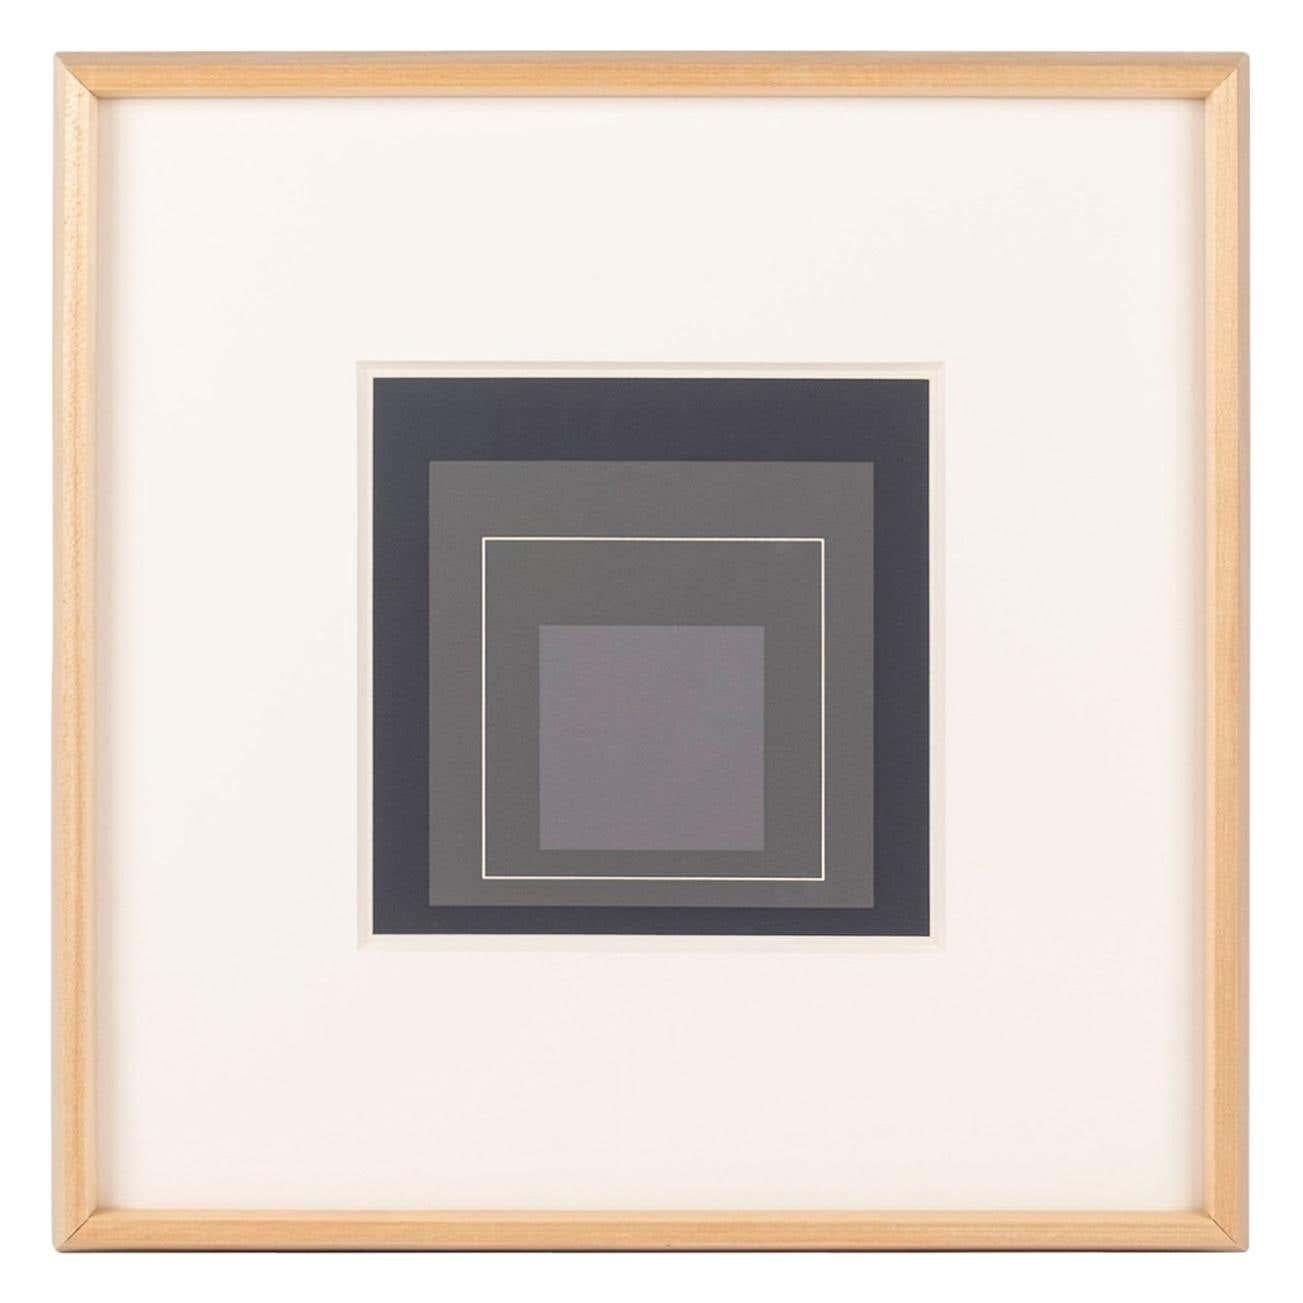 Three Homage to the square serigraphs by Josef Albers: original midcentury silk screen prints (Starnberg: Josef Keller Verlag, 1968) by Josef Albers, (1888-1976). Matte window is 9 inches by 9 inches. Framed in unfinished maple using acid-free